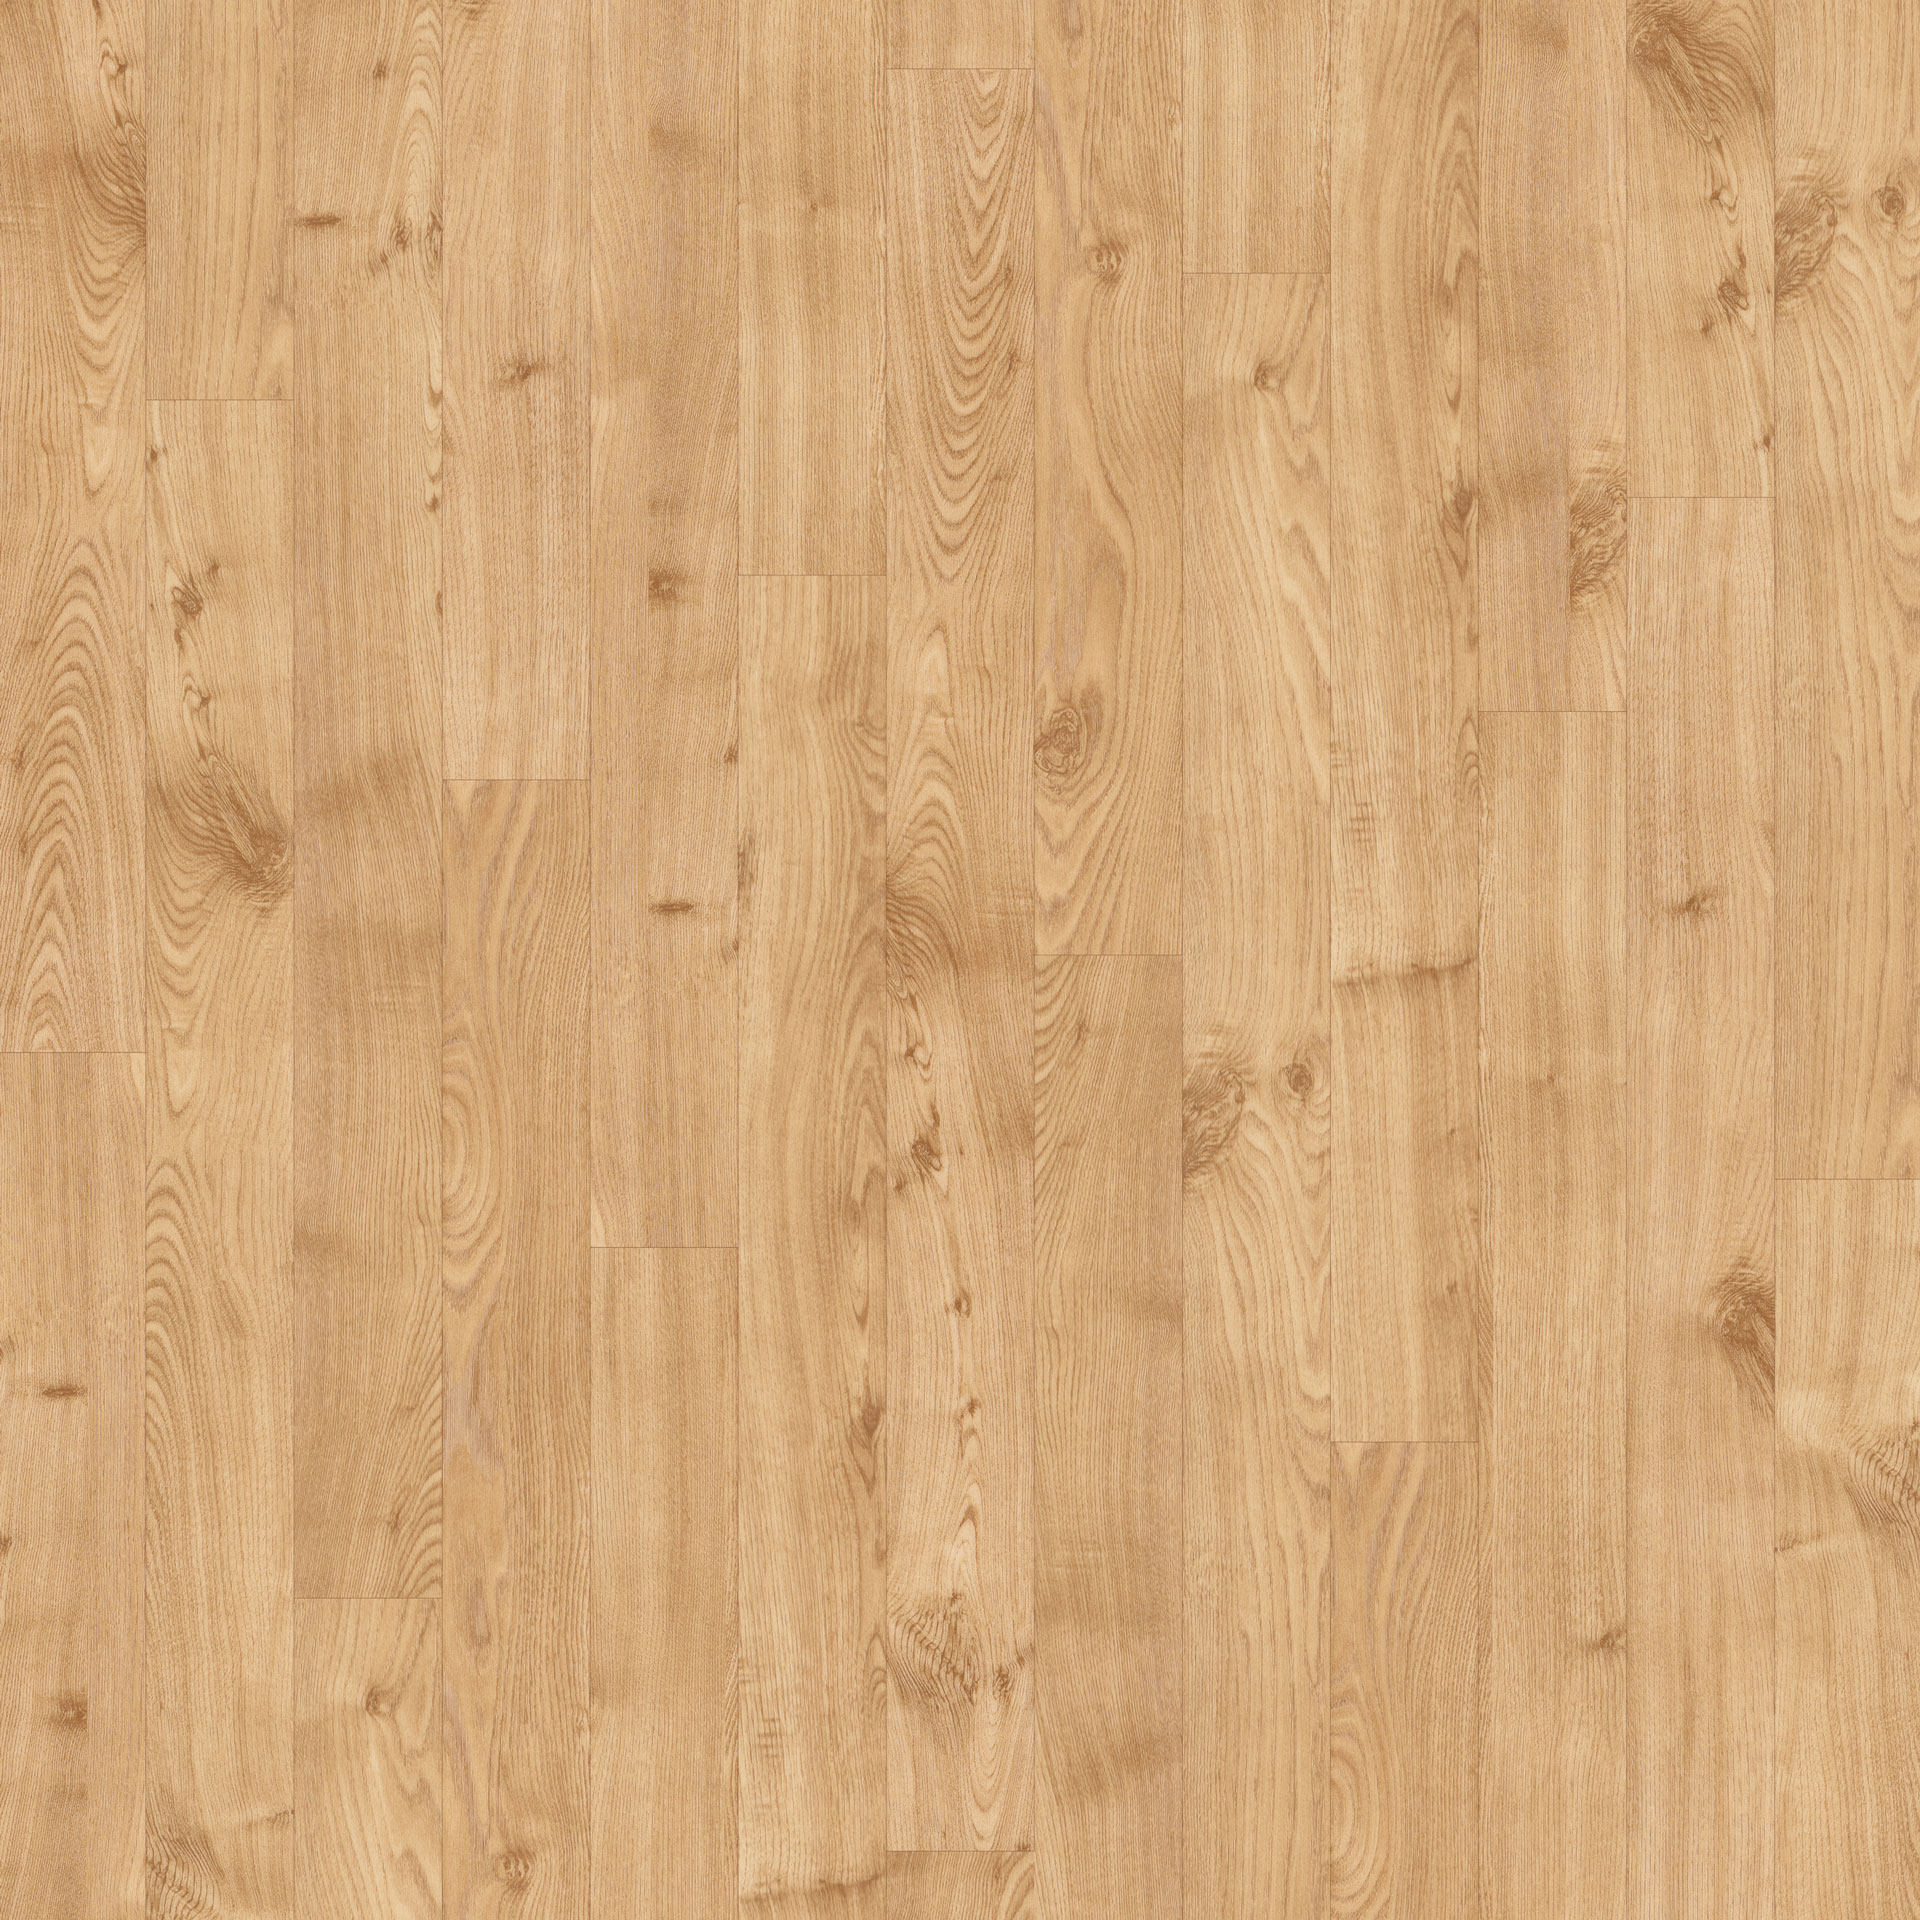 krp-img/Images/Products/Swatches/Product%20Listing%20Images/Product%20Overheads/Monet/RP11-American-Oak_OH.jpg